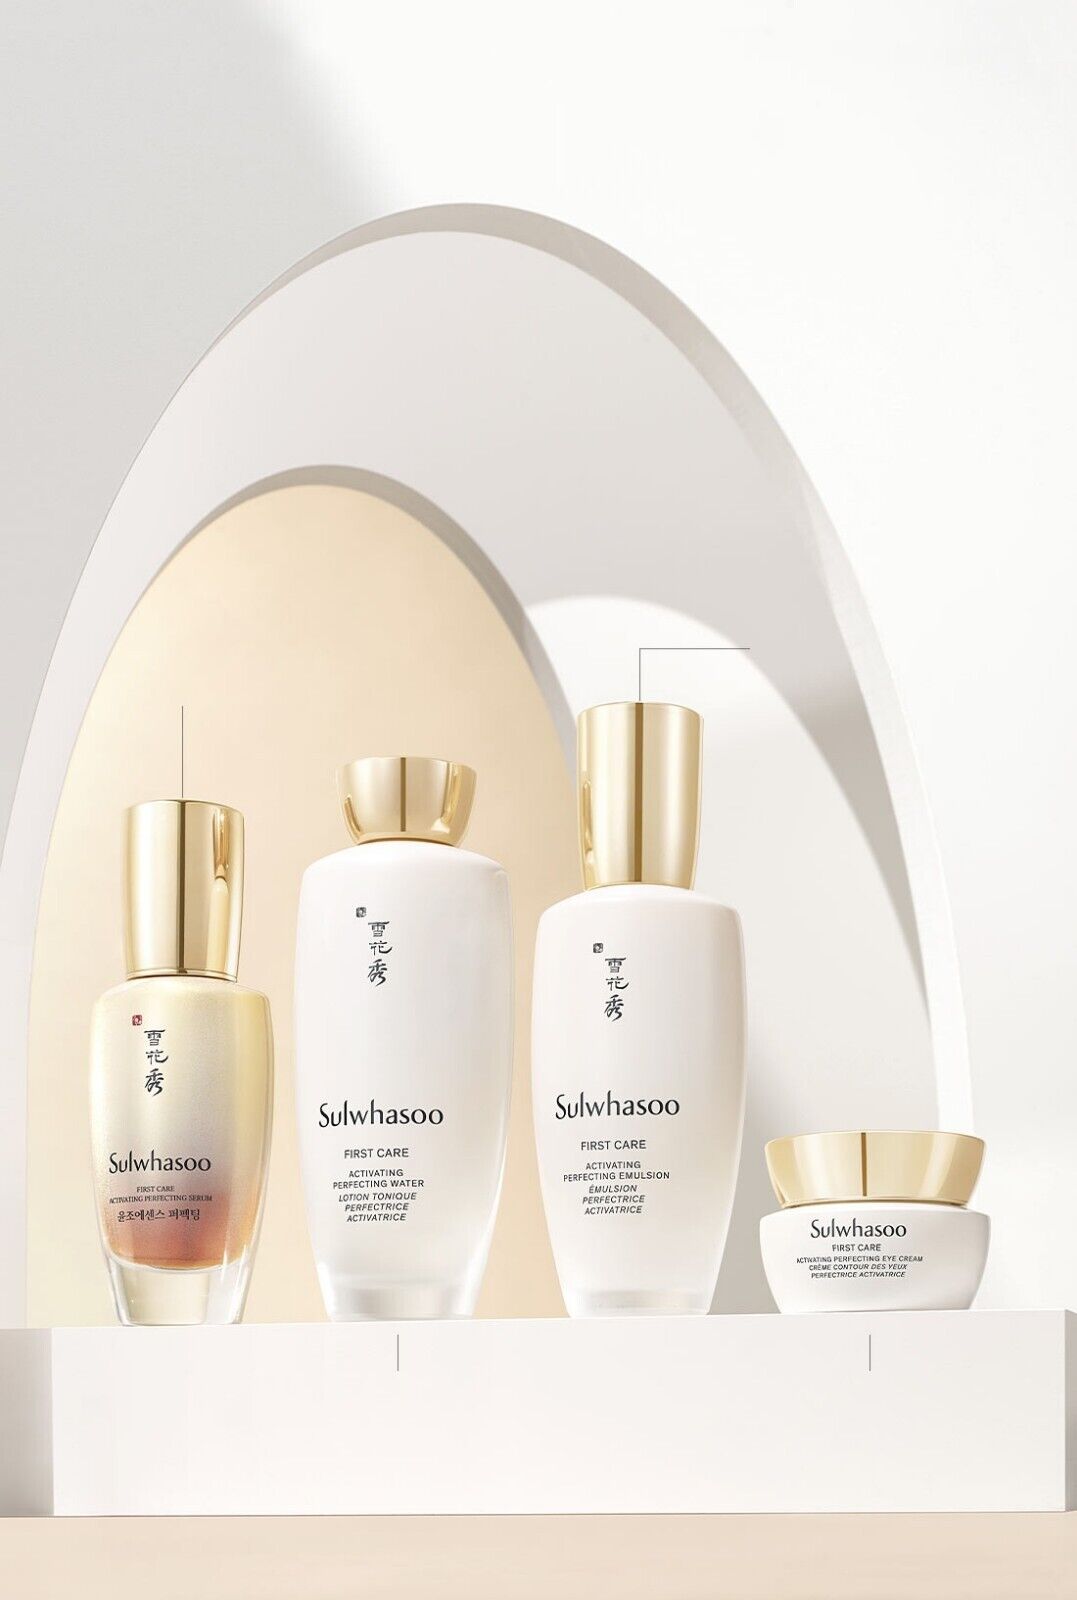 Sulwhasoo First Care Activating Perfecting Duo Set/Toner+Emulsion/Wedding Gift G